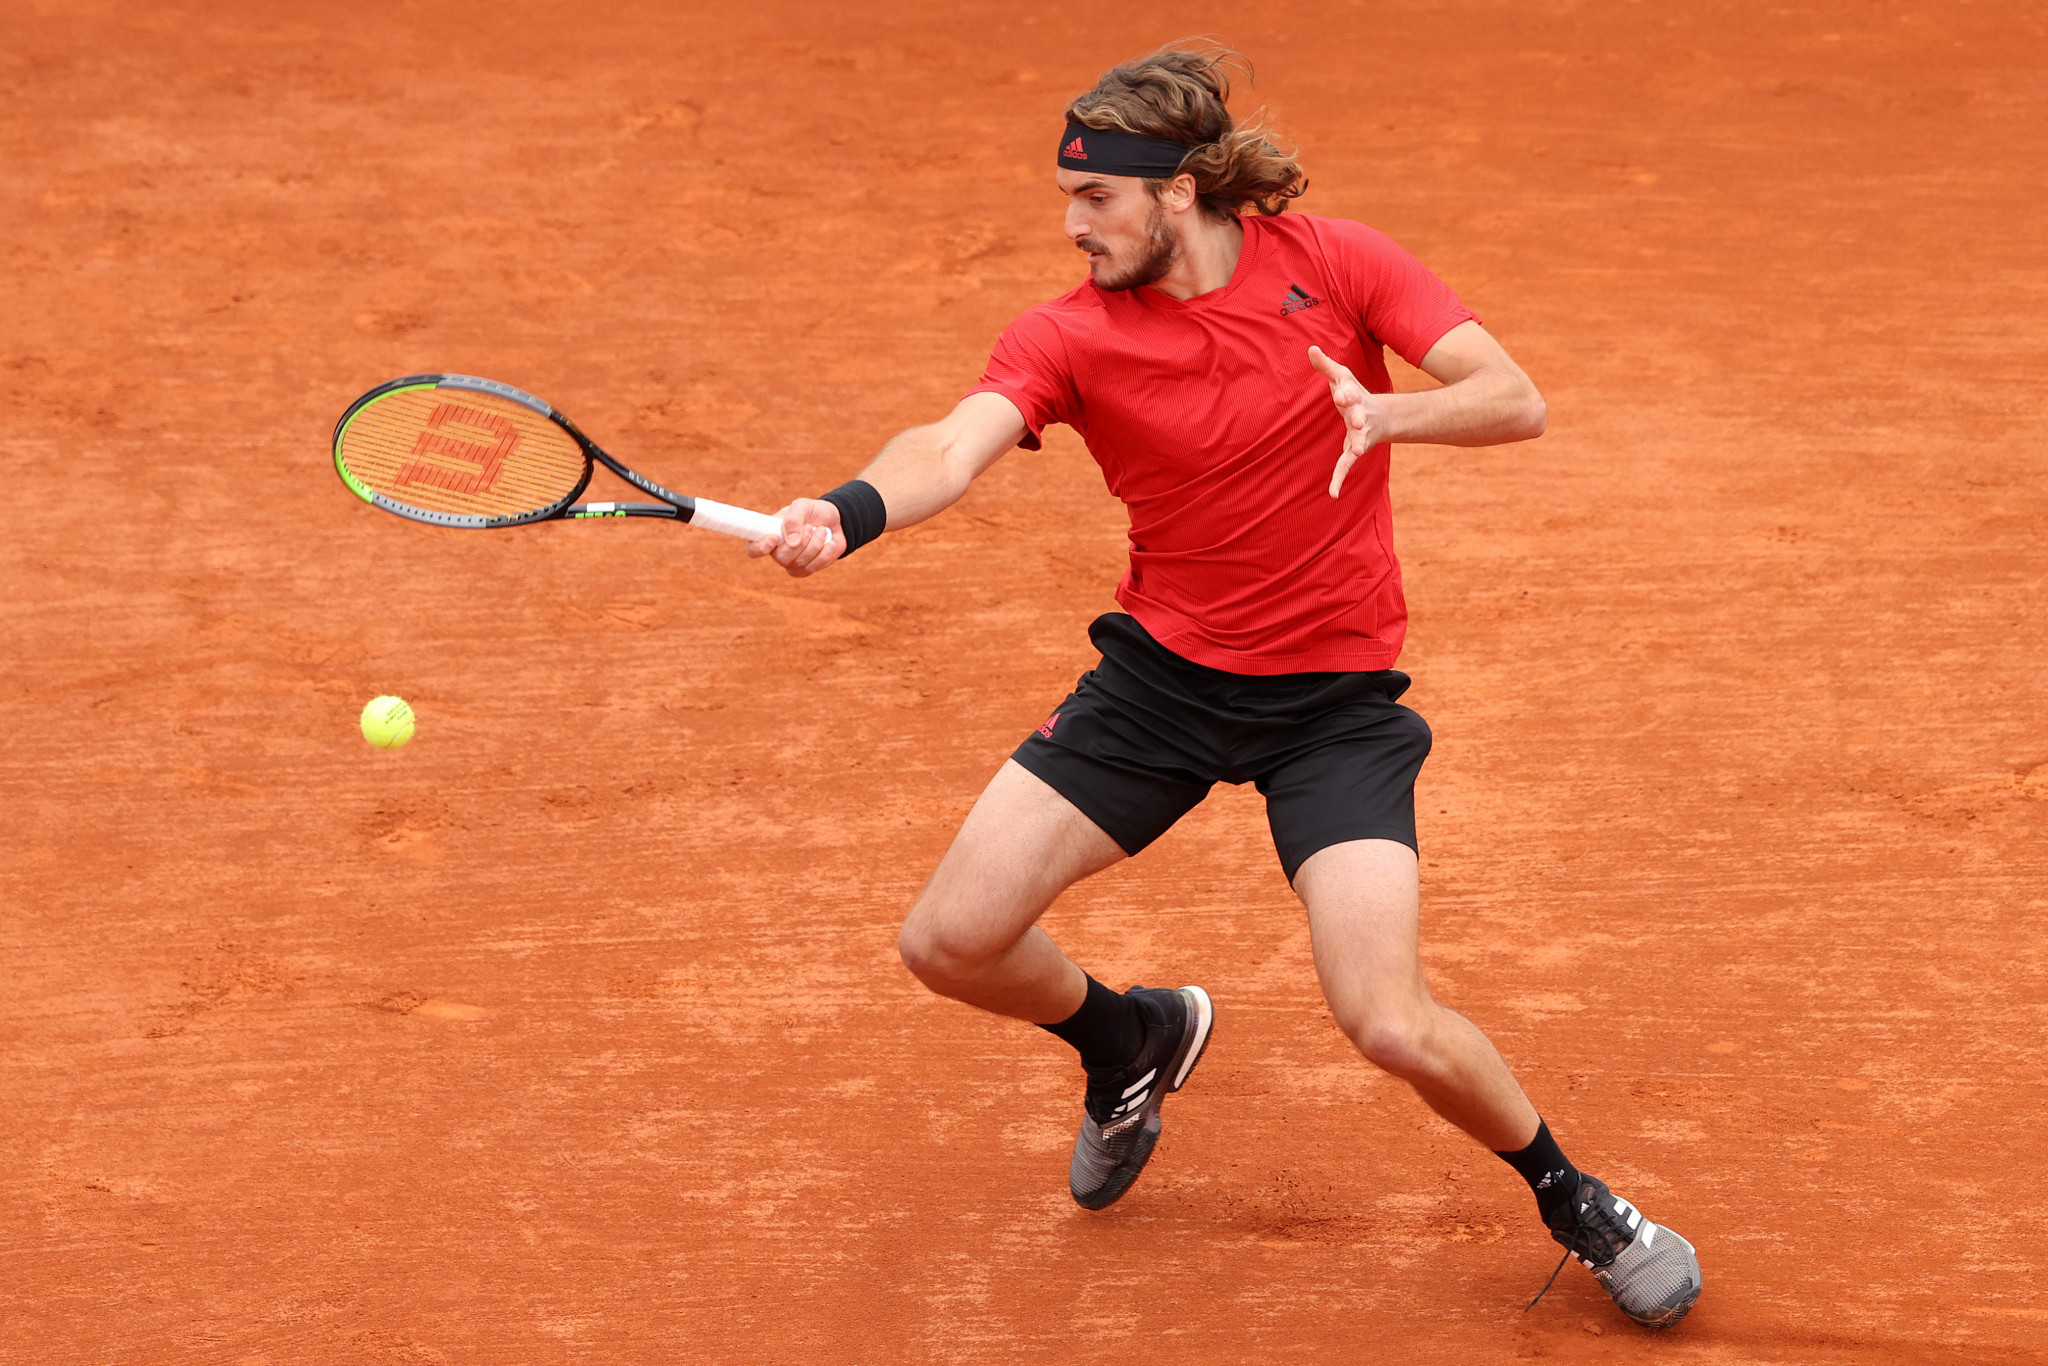 Stefanos Tsitsipas took just over an hour to beat Dan Evans and reach the final of the Monte-Carlo Masters ©Getty Images